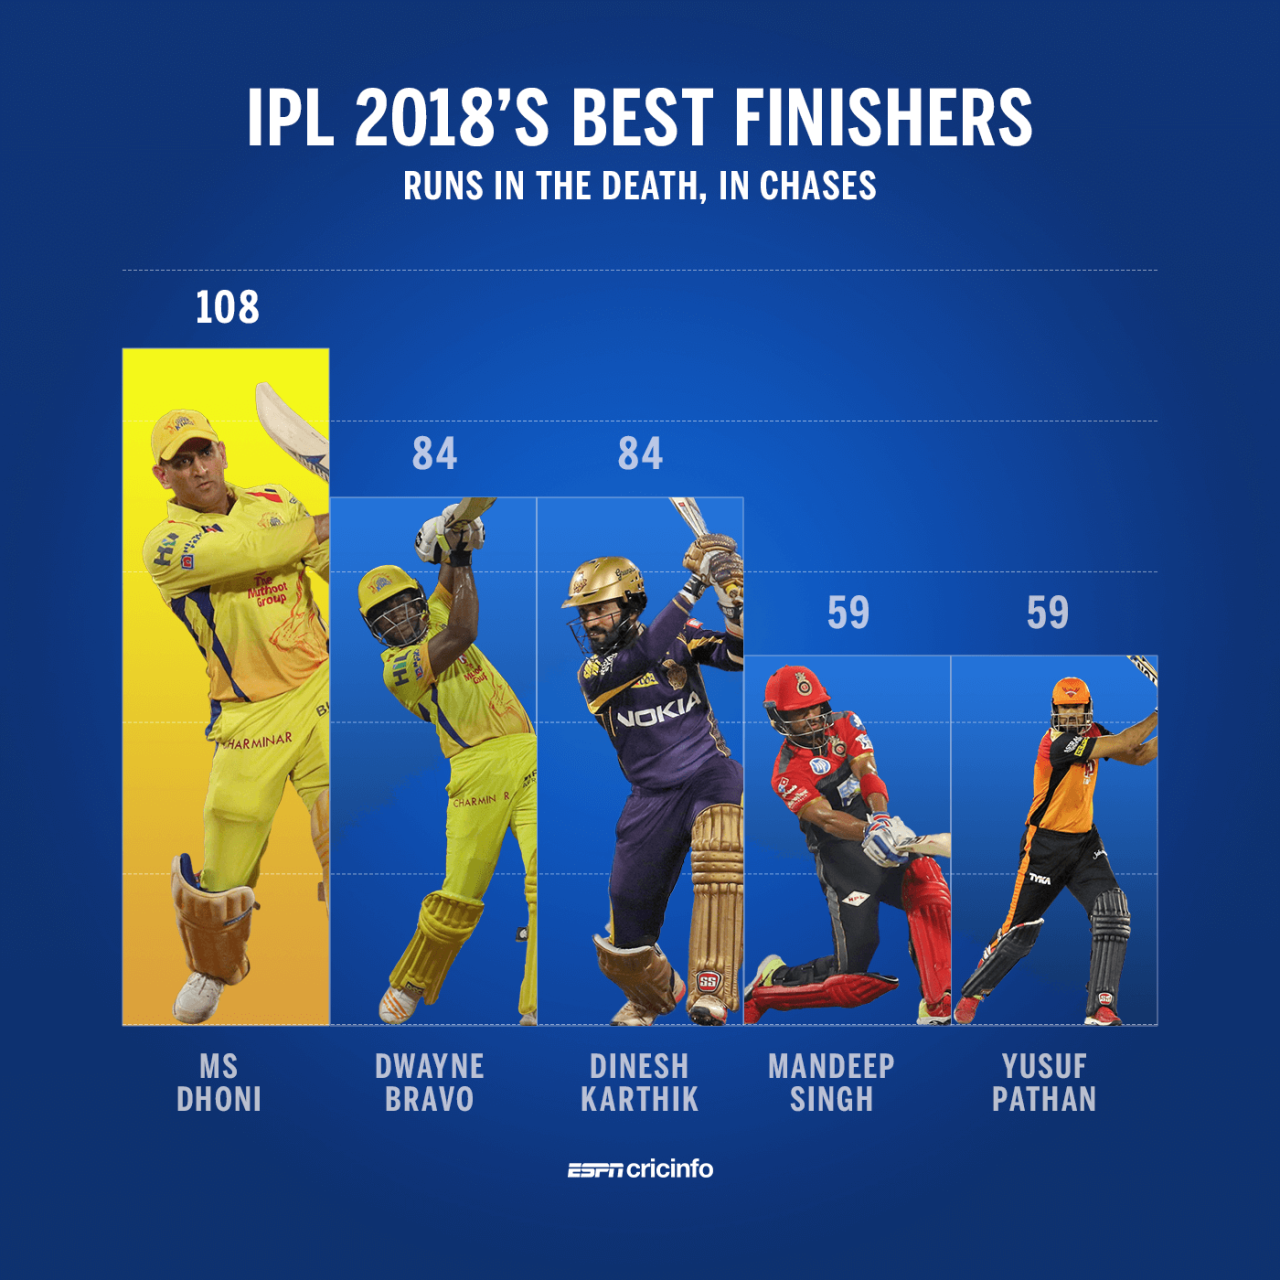 MS Dhoni has more runs in the late stages of chases than any other batsman this IPL season, May 5, 2018